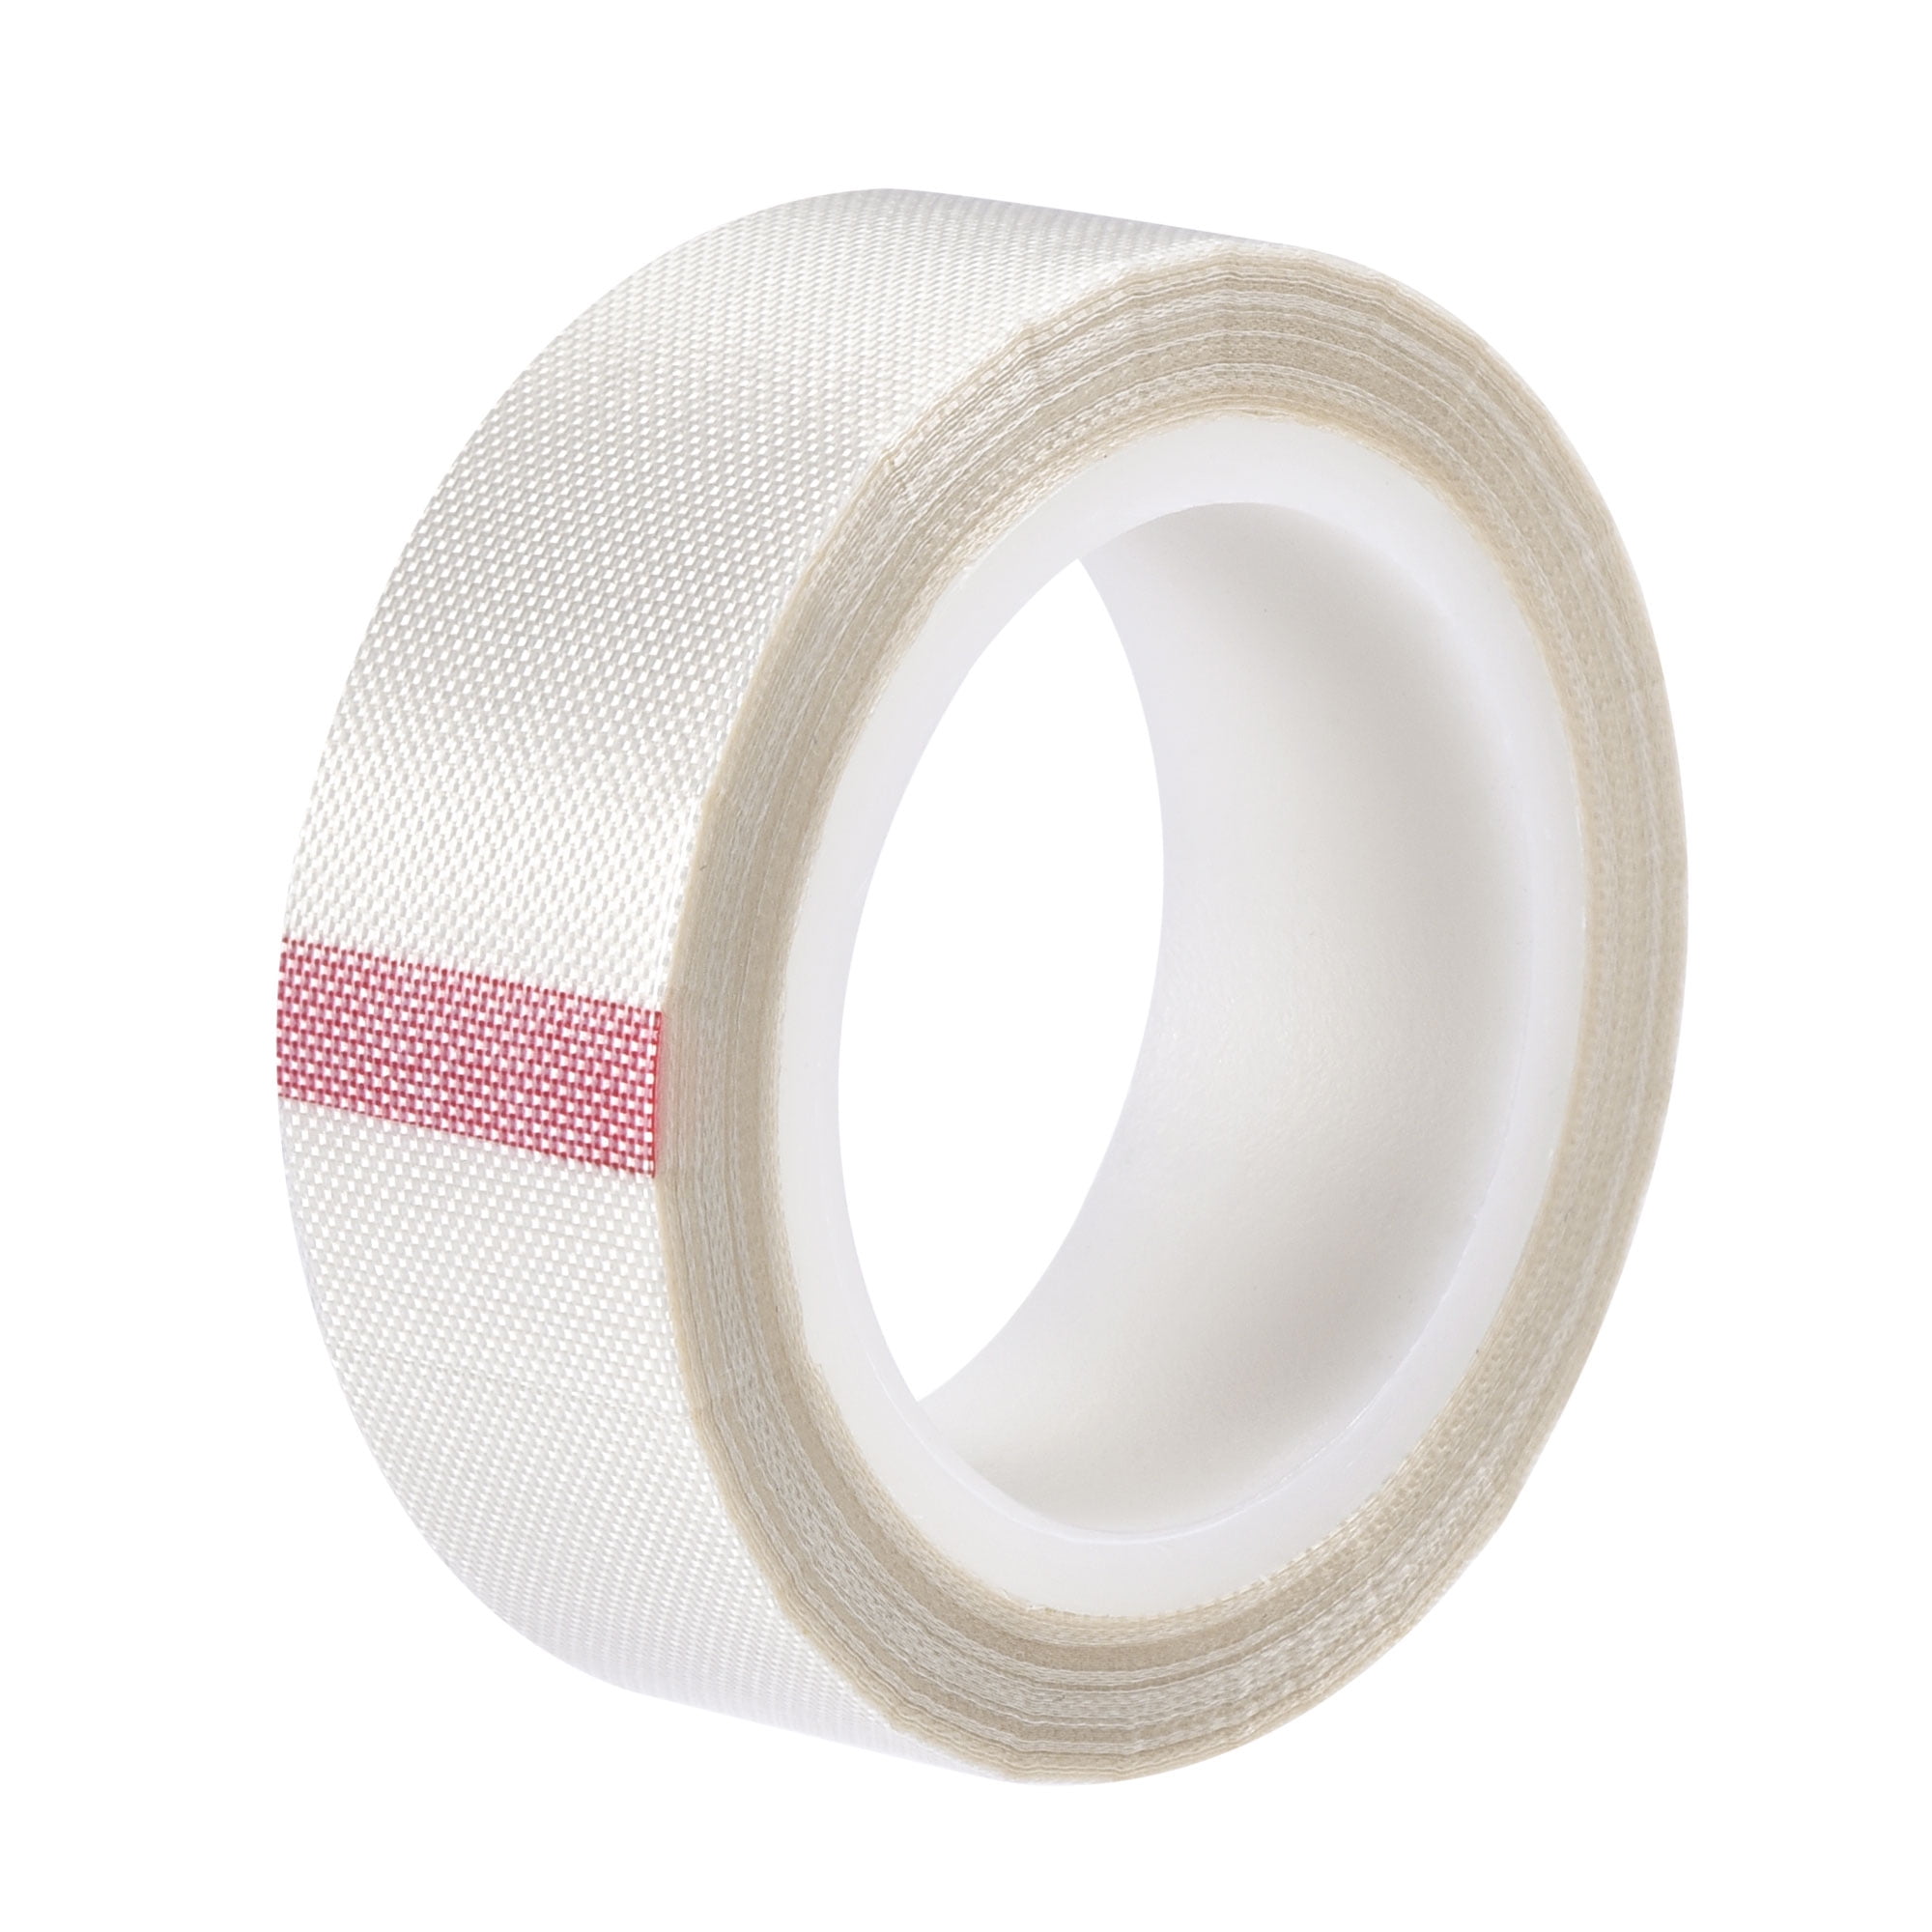 Heat Resistant Tape High Temperature Adhesive Tape 19mm Width 10m 33ft  Length